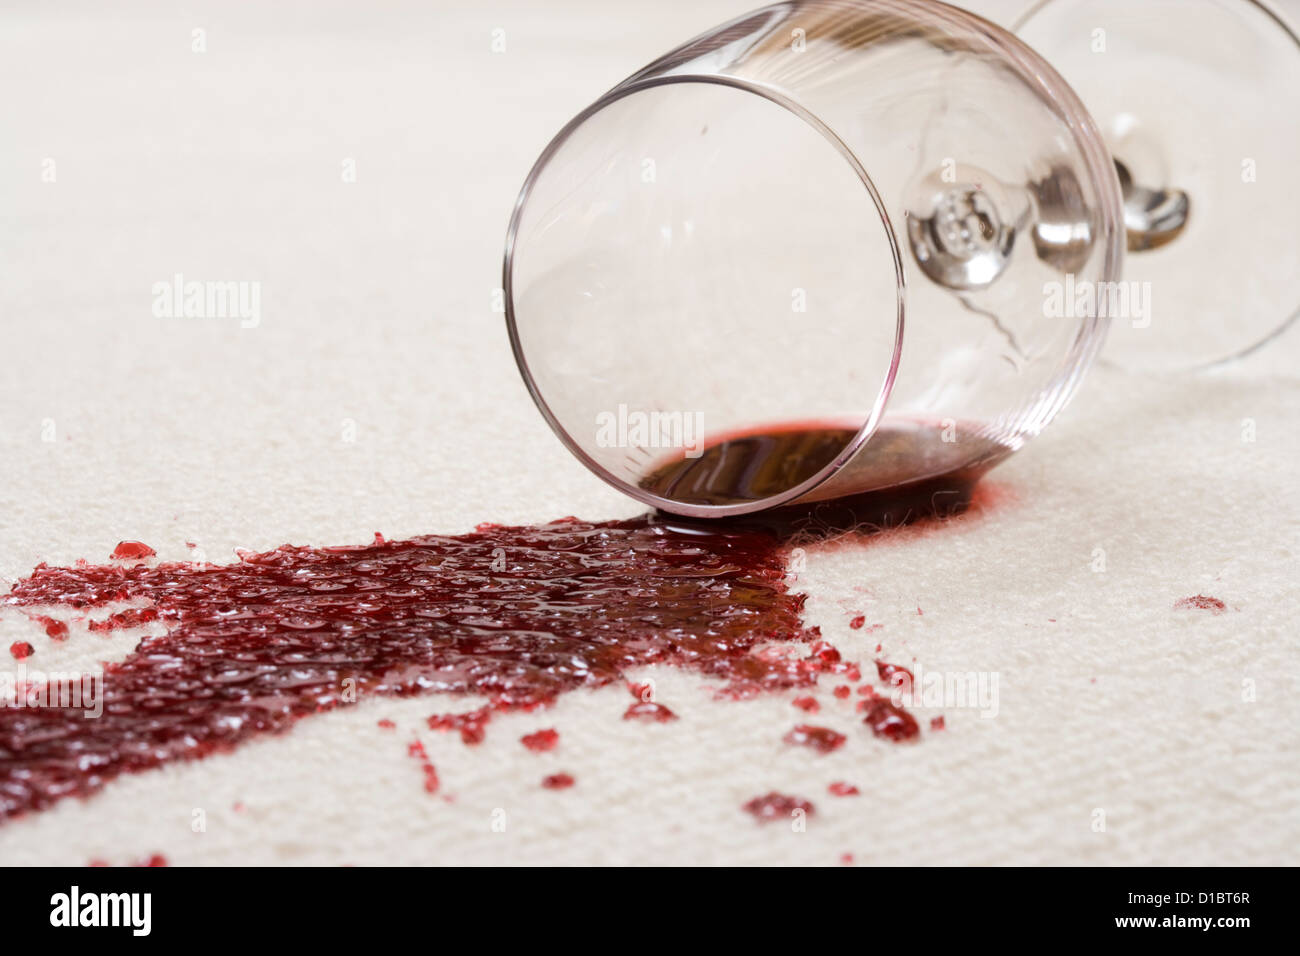 Red wine spilled on carpet. Stock Photo